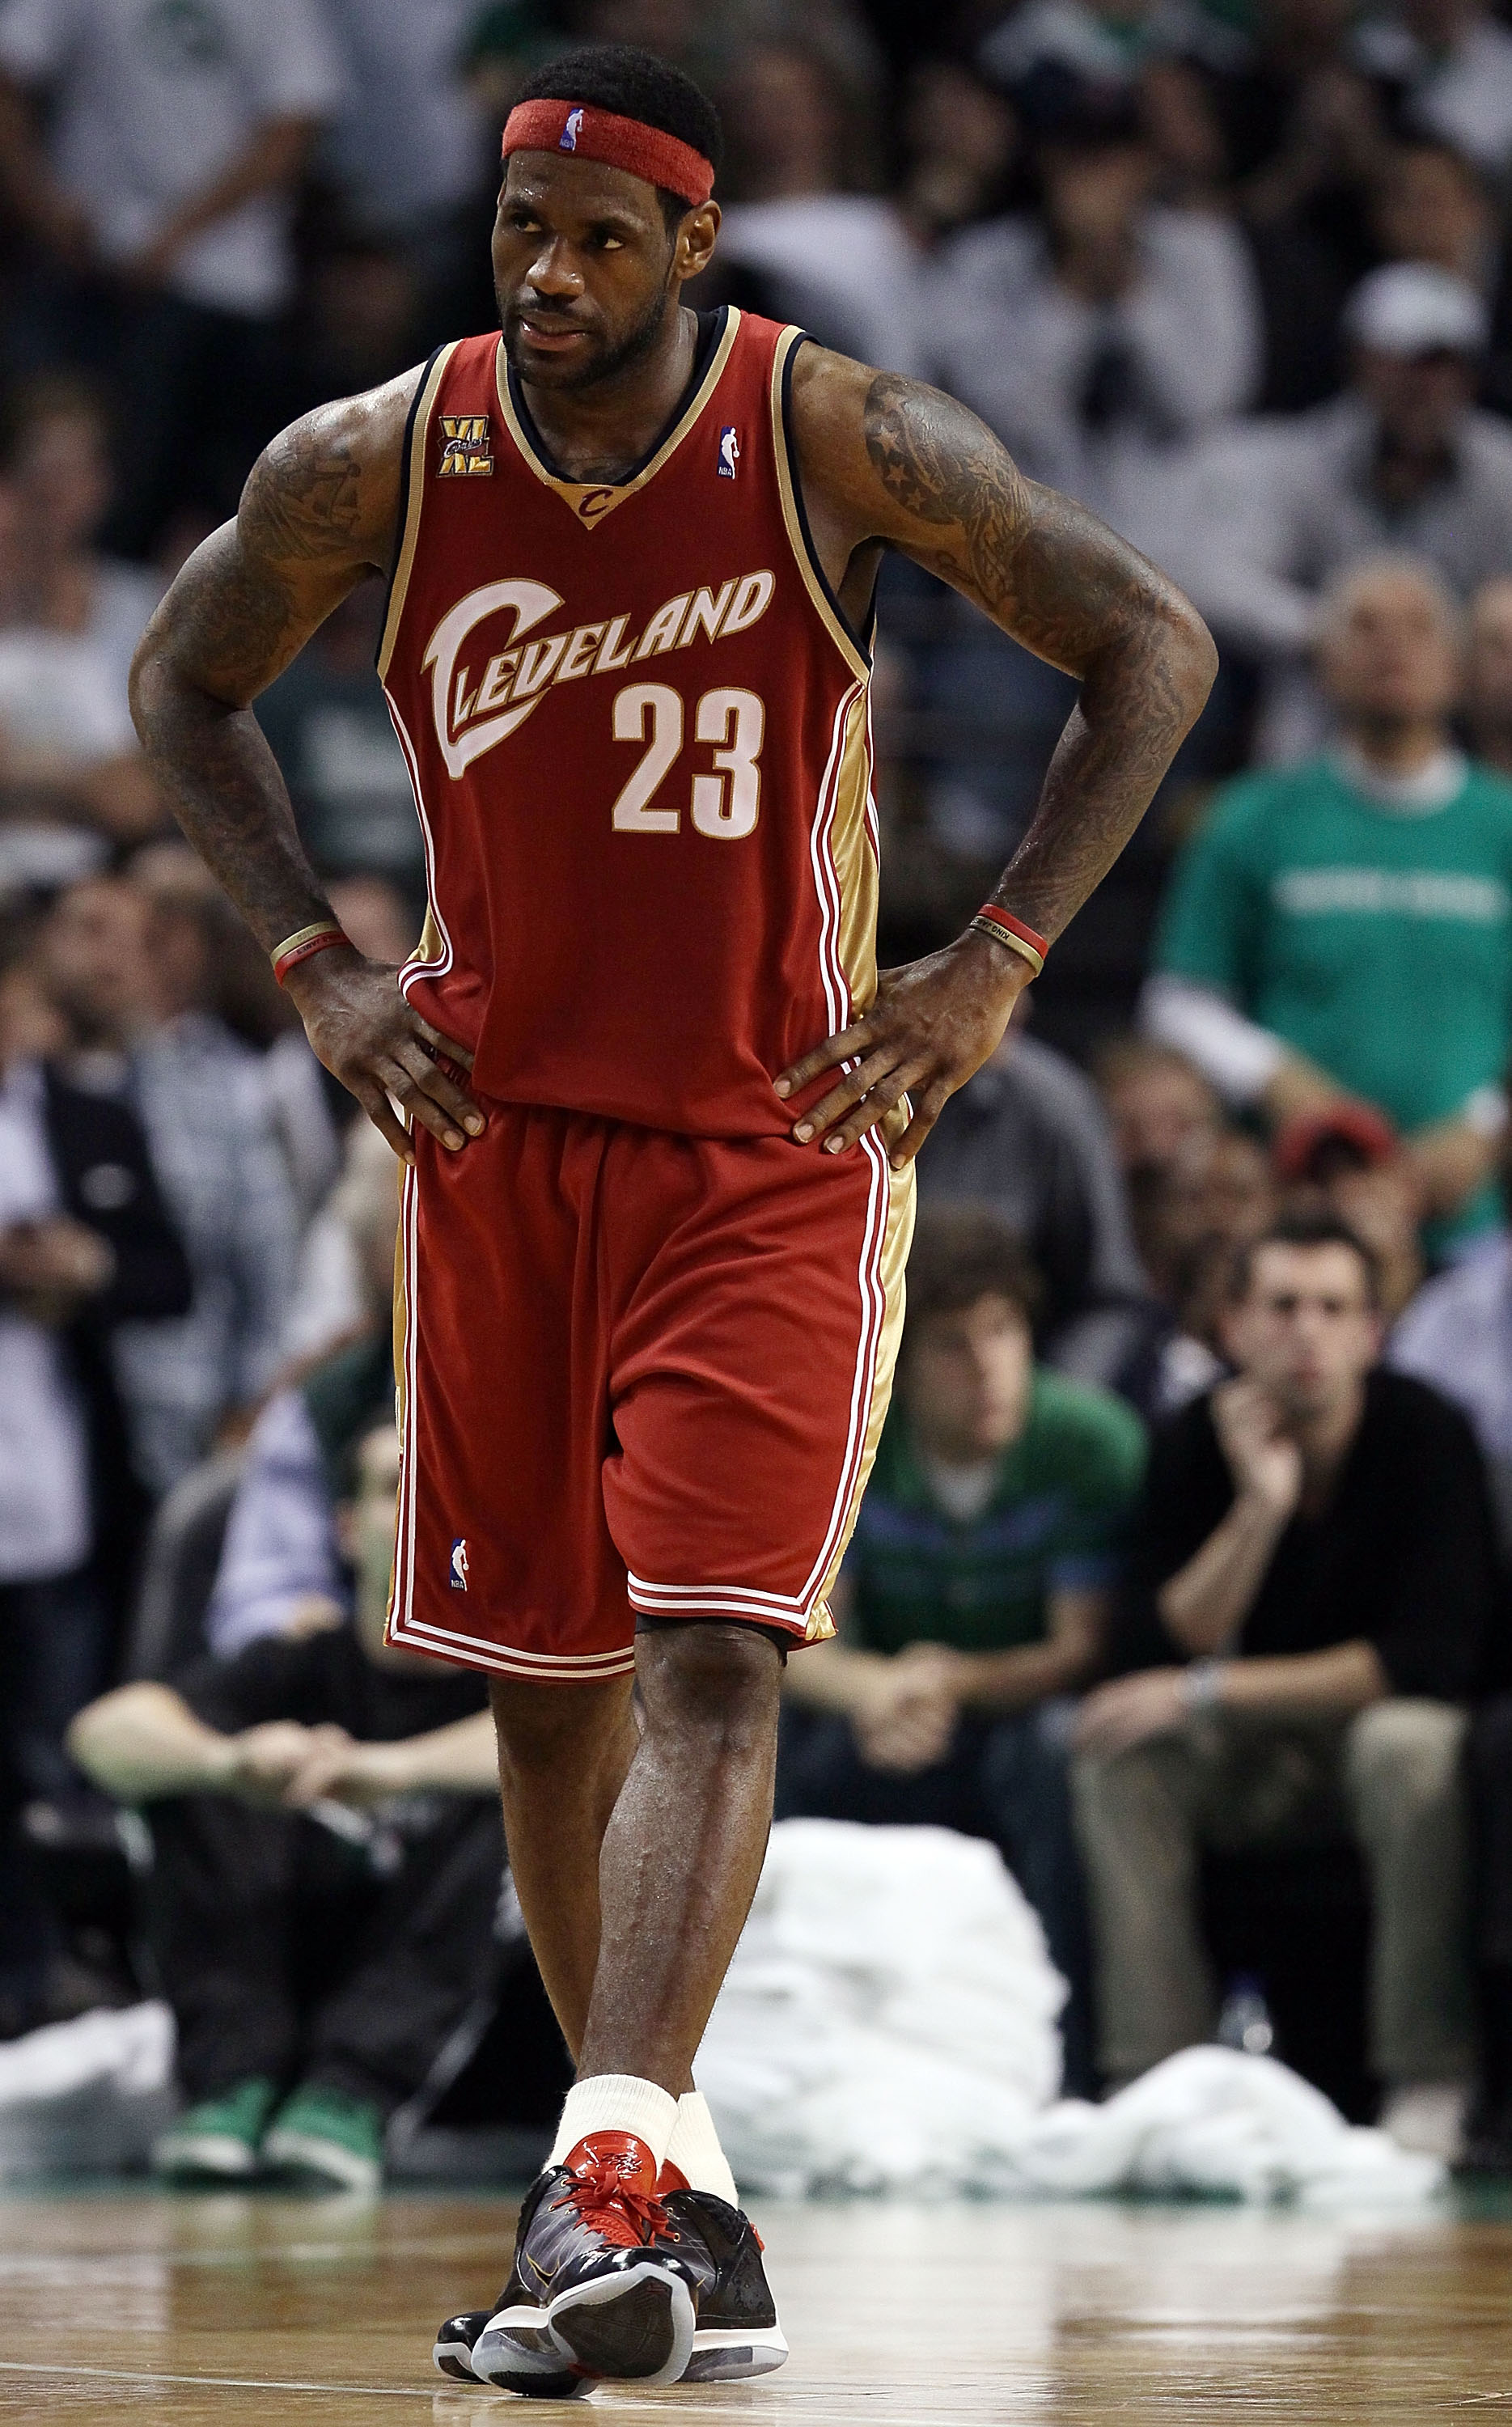 BOSTON - MAY 13:  LeBron James #23  of the Cleveland Cavaliers reacts late in the fourth quarter against the Boston Celtics during Game Six of the Eastern Conference Semifinals of the 2010 NBA playoffs at TD Garden on May 13, 2010 in Boston, Massachusetts